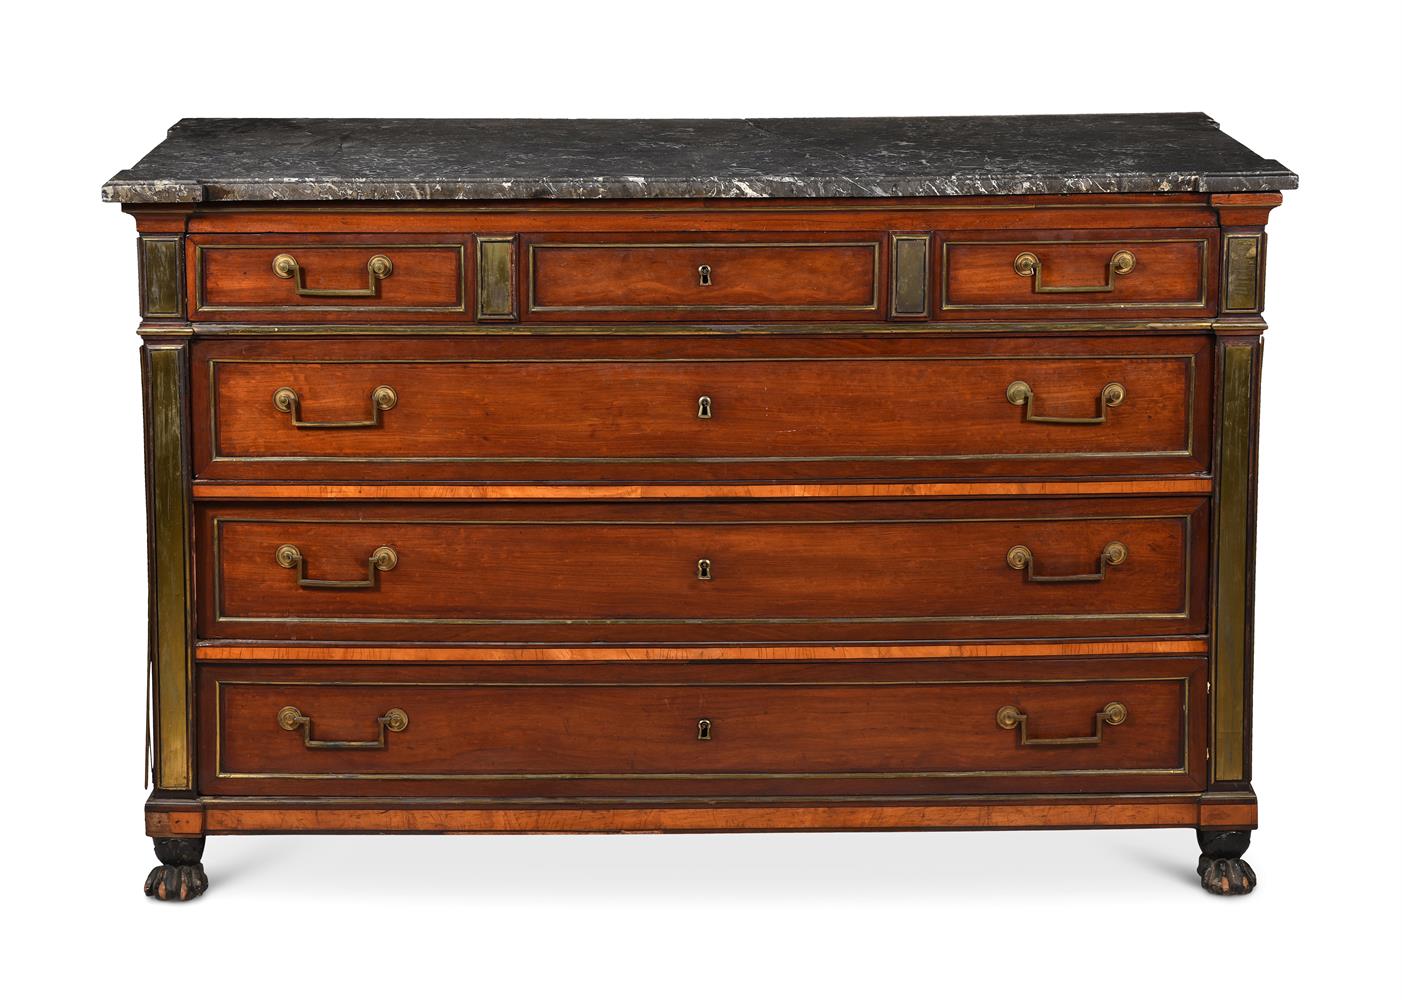 QUEEN MARY'S DIRECTOIRE MAHOGANY AND BRASS MOUNTED COMMODE, LATE 18TH/EARLY 19TH CENTURY - Image 2 of 7